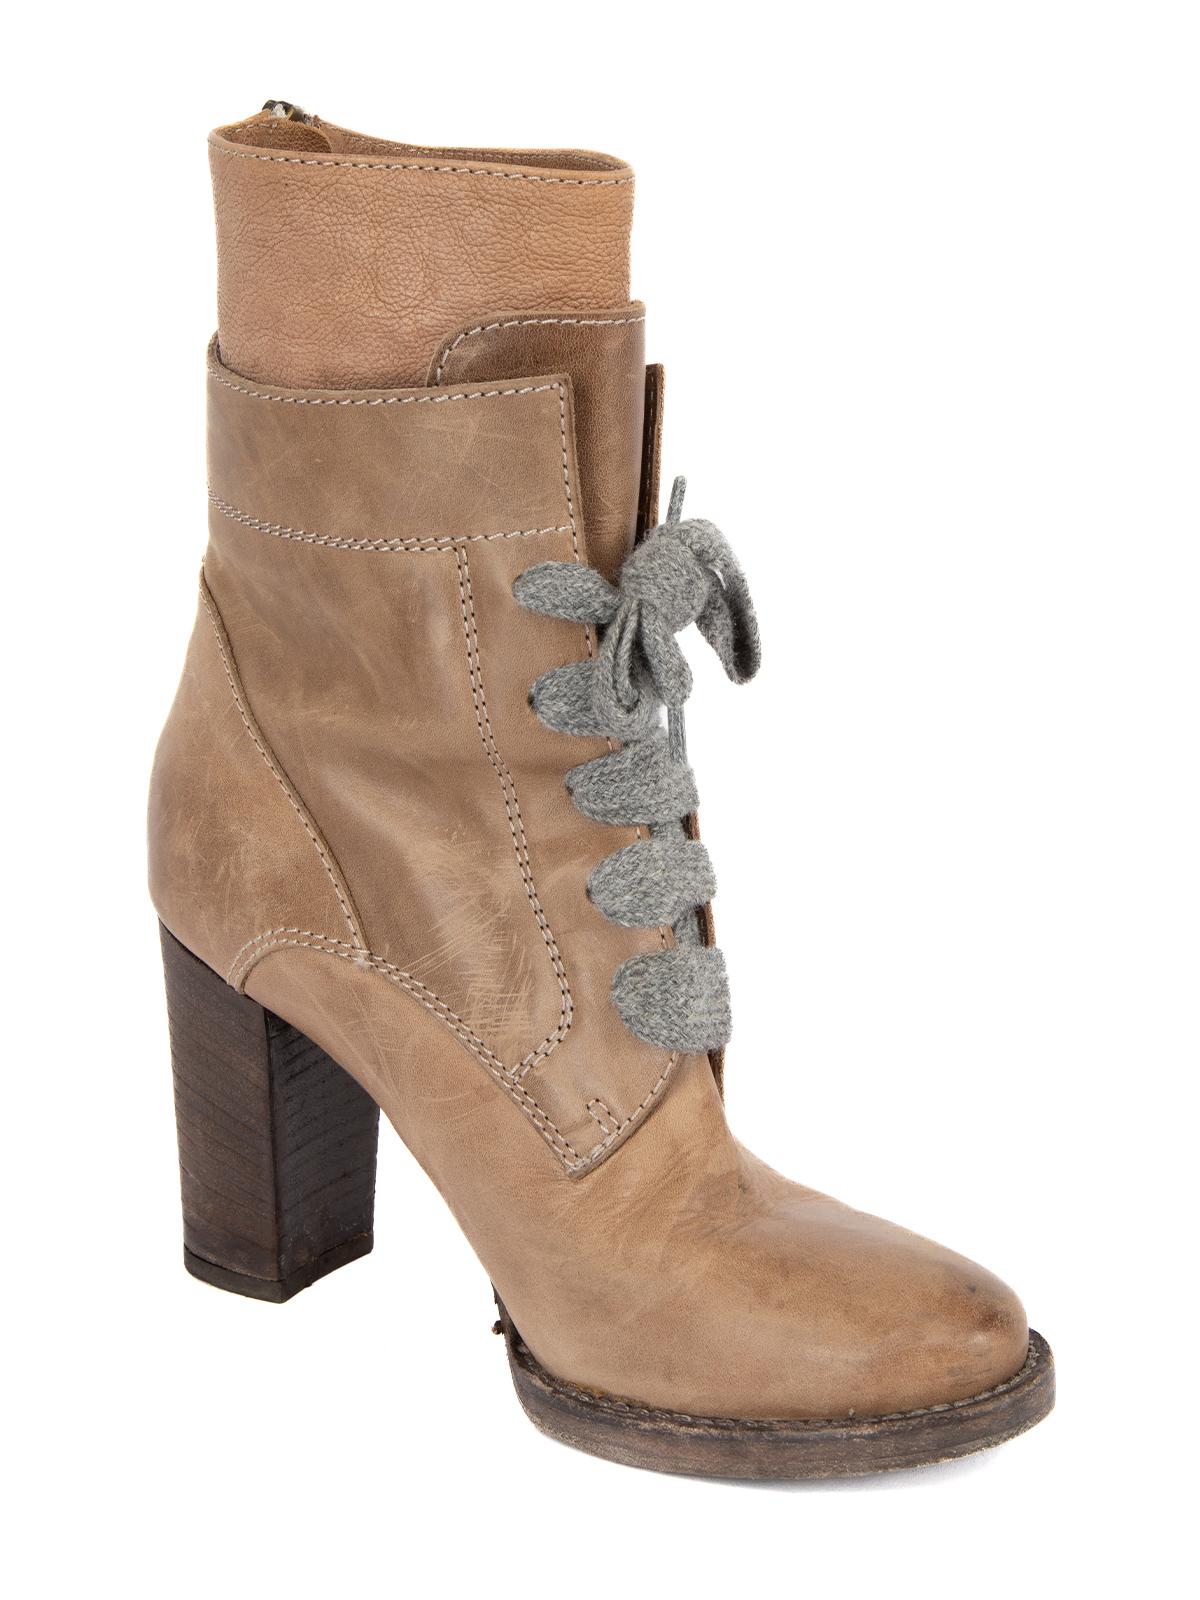 CONDITION is Very good. Minimal wear to boots is evident. Minimal wear to outsole on this used Brunello Cucinelli designer resale item. The scuffs/marks seen on these boots are part of the design. Details Brown Leather Lace up Ankle boot Block heel